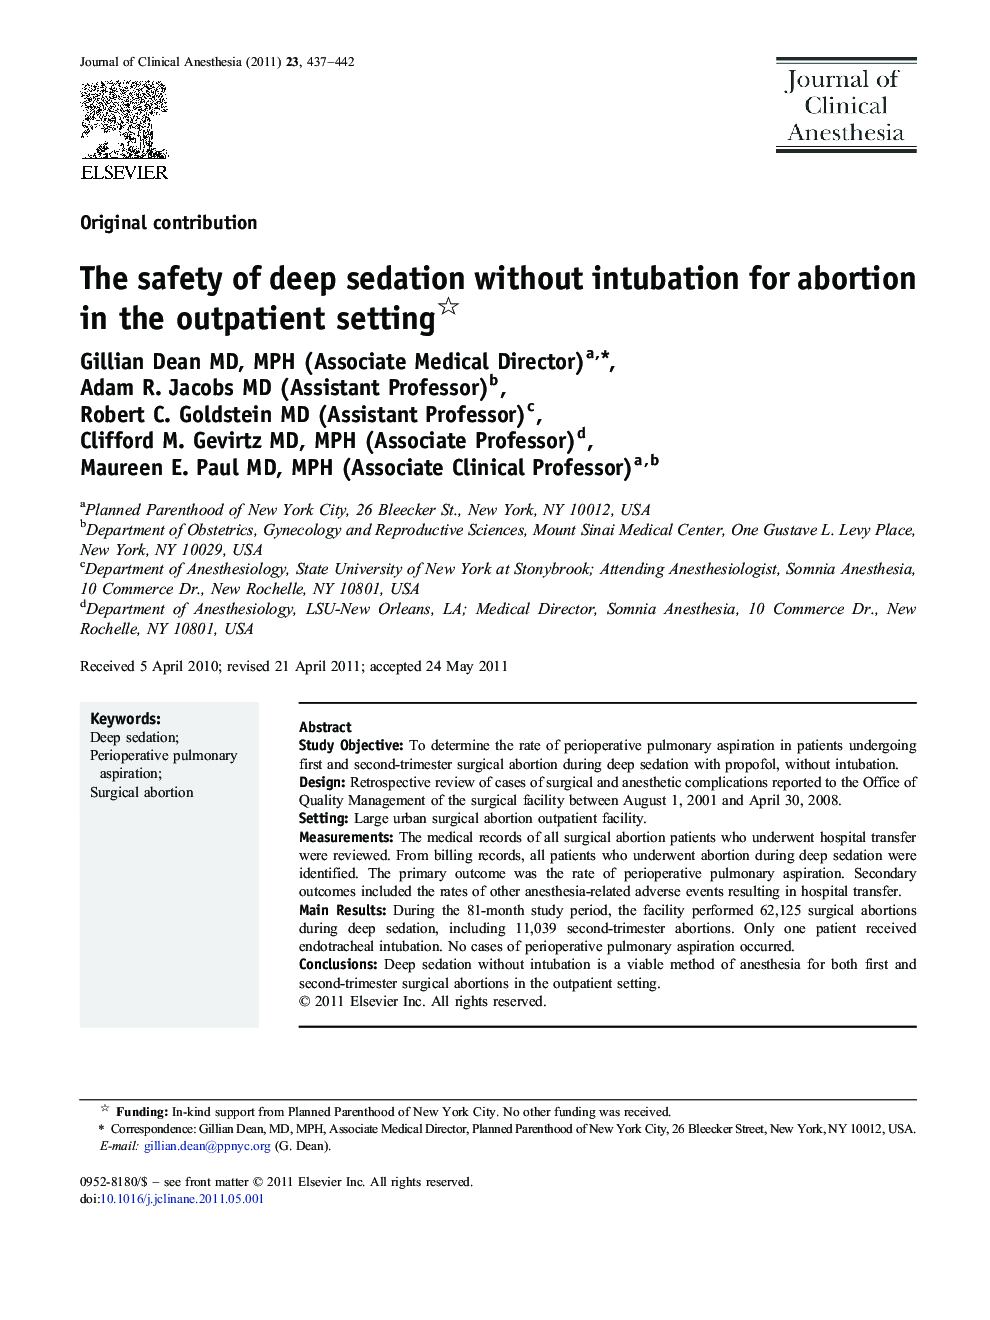 The safety of deep sedation without intubation for abortion in the outpatient setting 